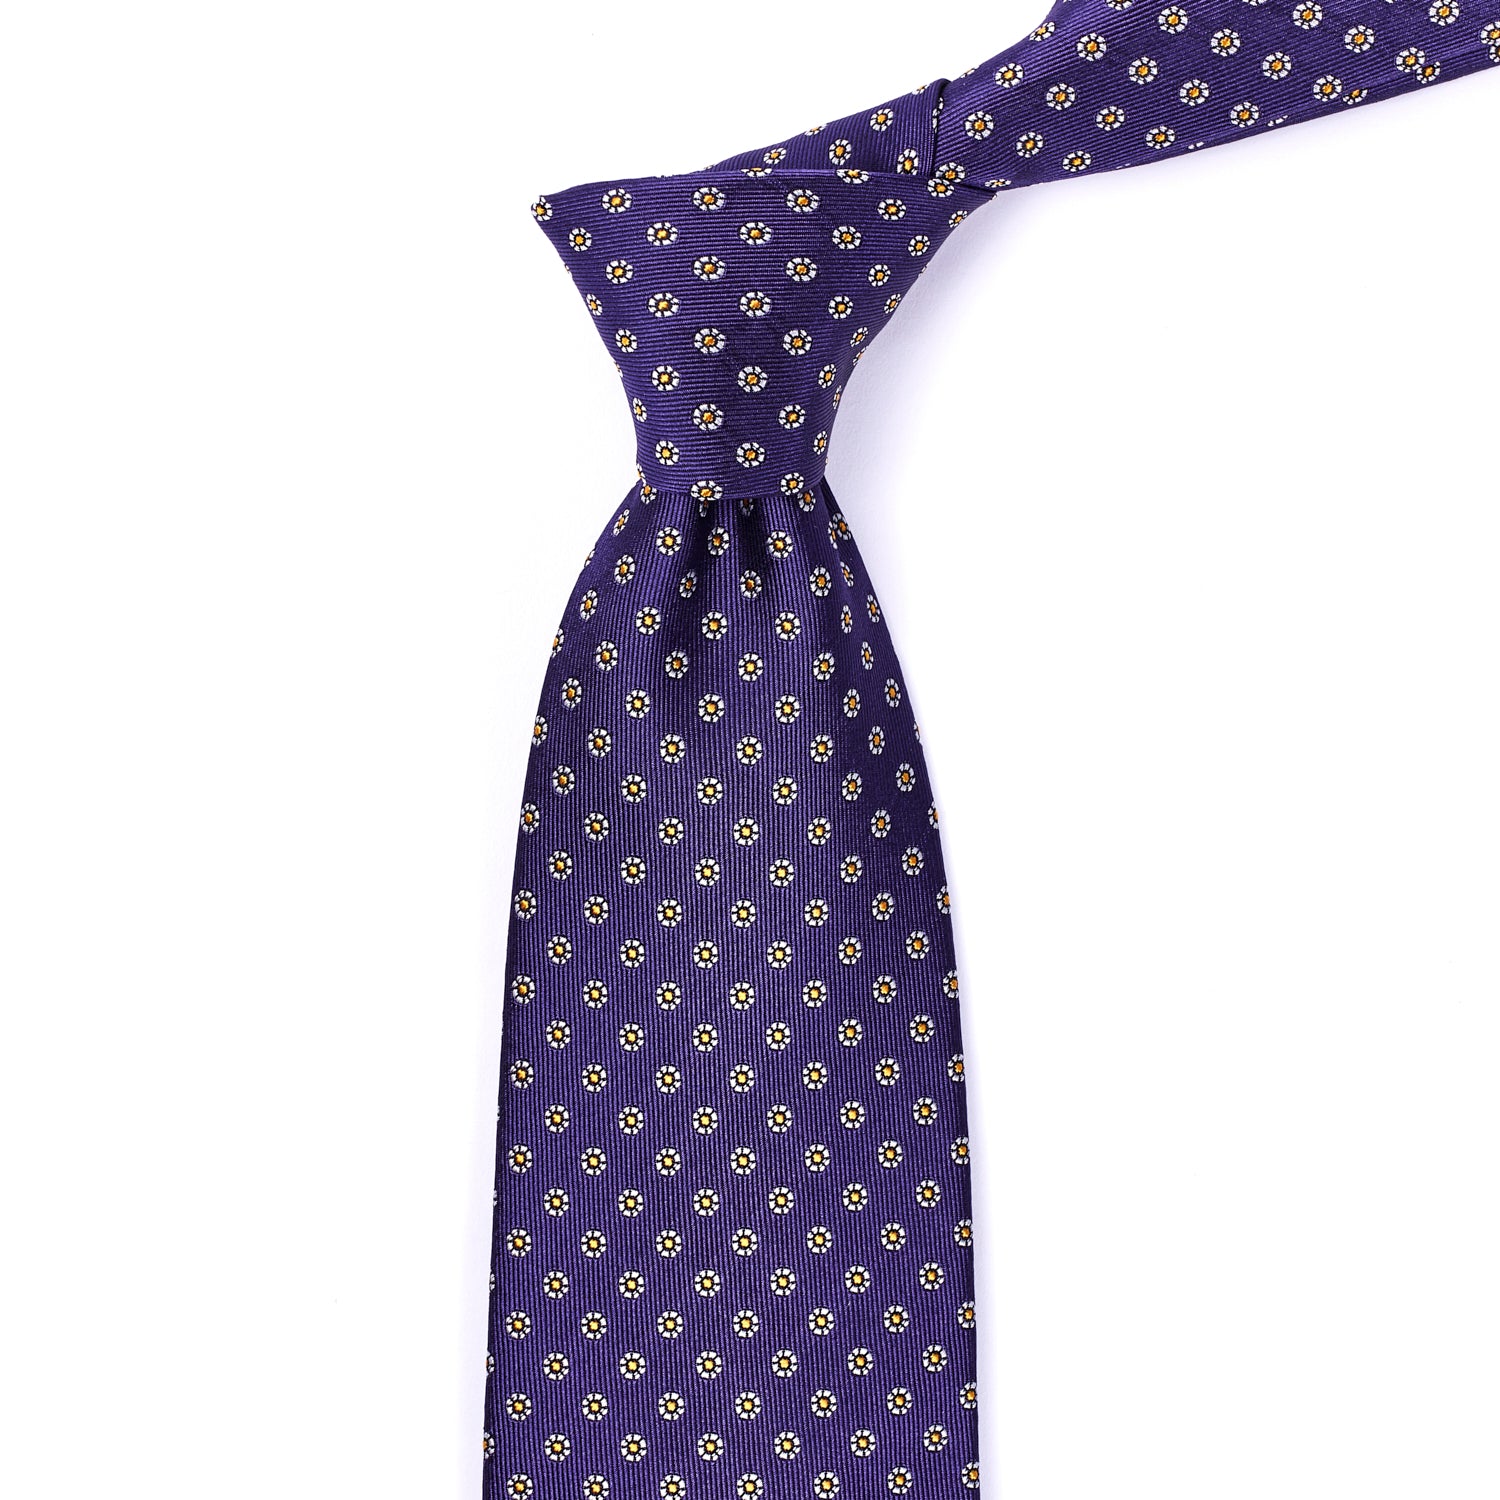 A KirbyAllison.com Sovereign Grade Plum Floral Jacquard Tie, 150 cm with a gold polka dot pattern, suitable for Sovereign Grade attire.